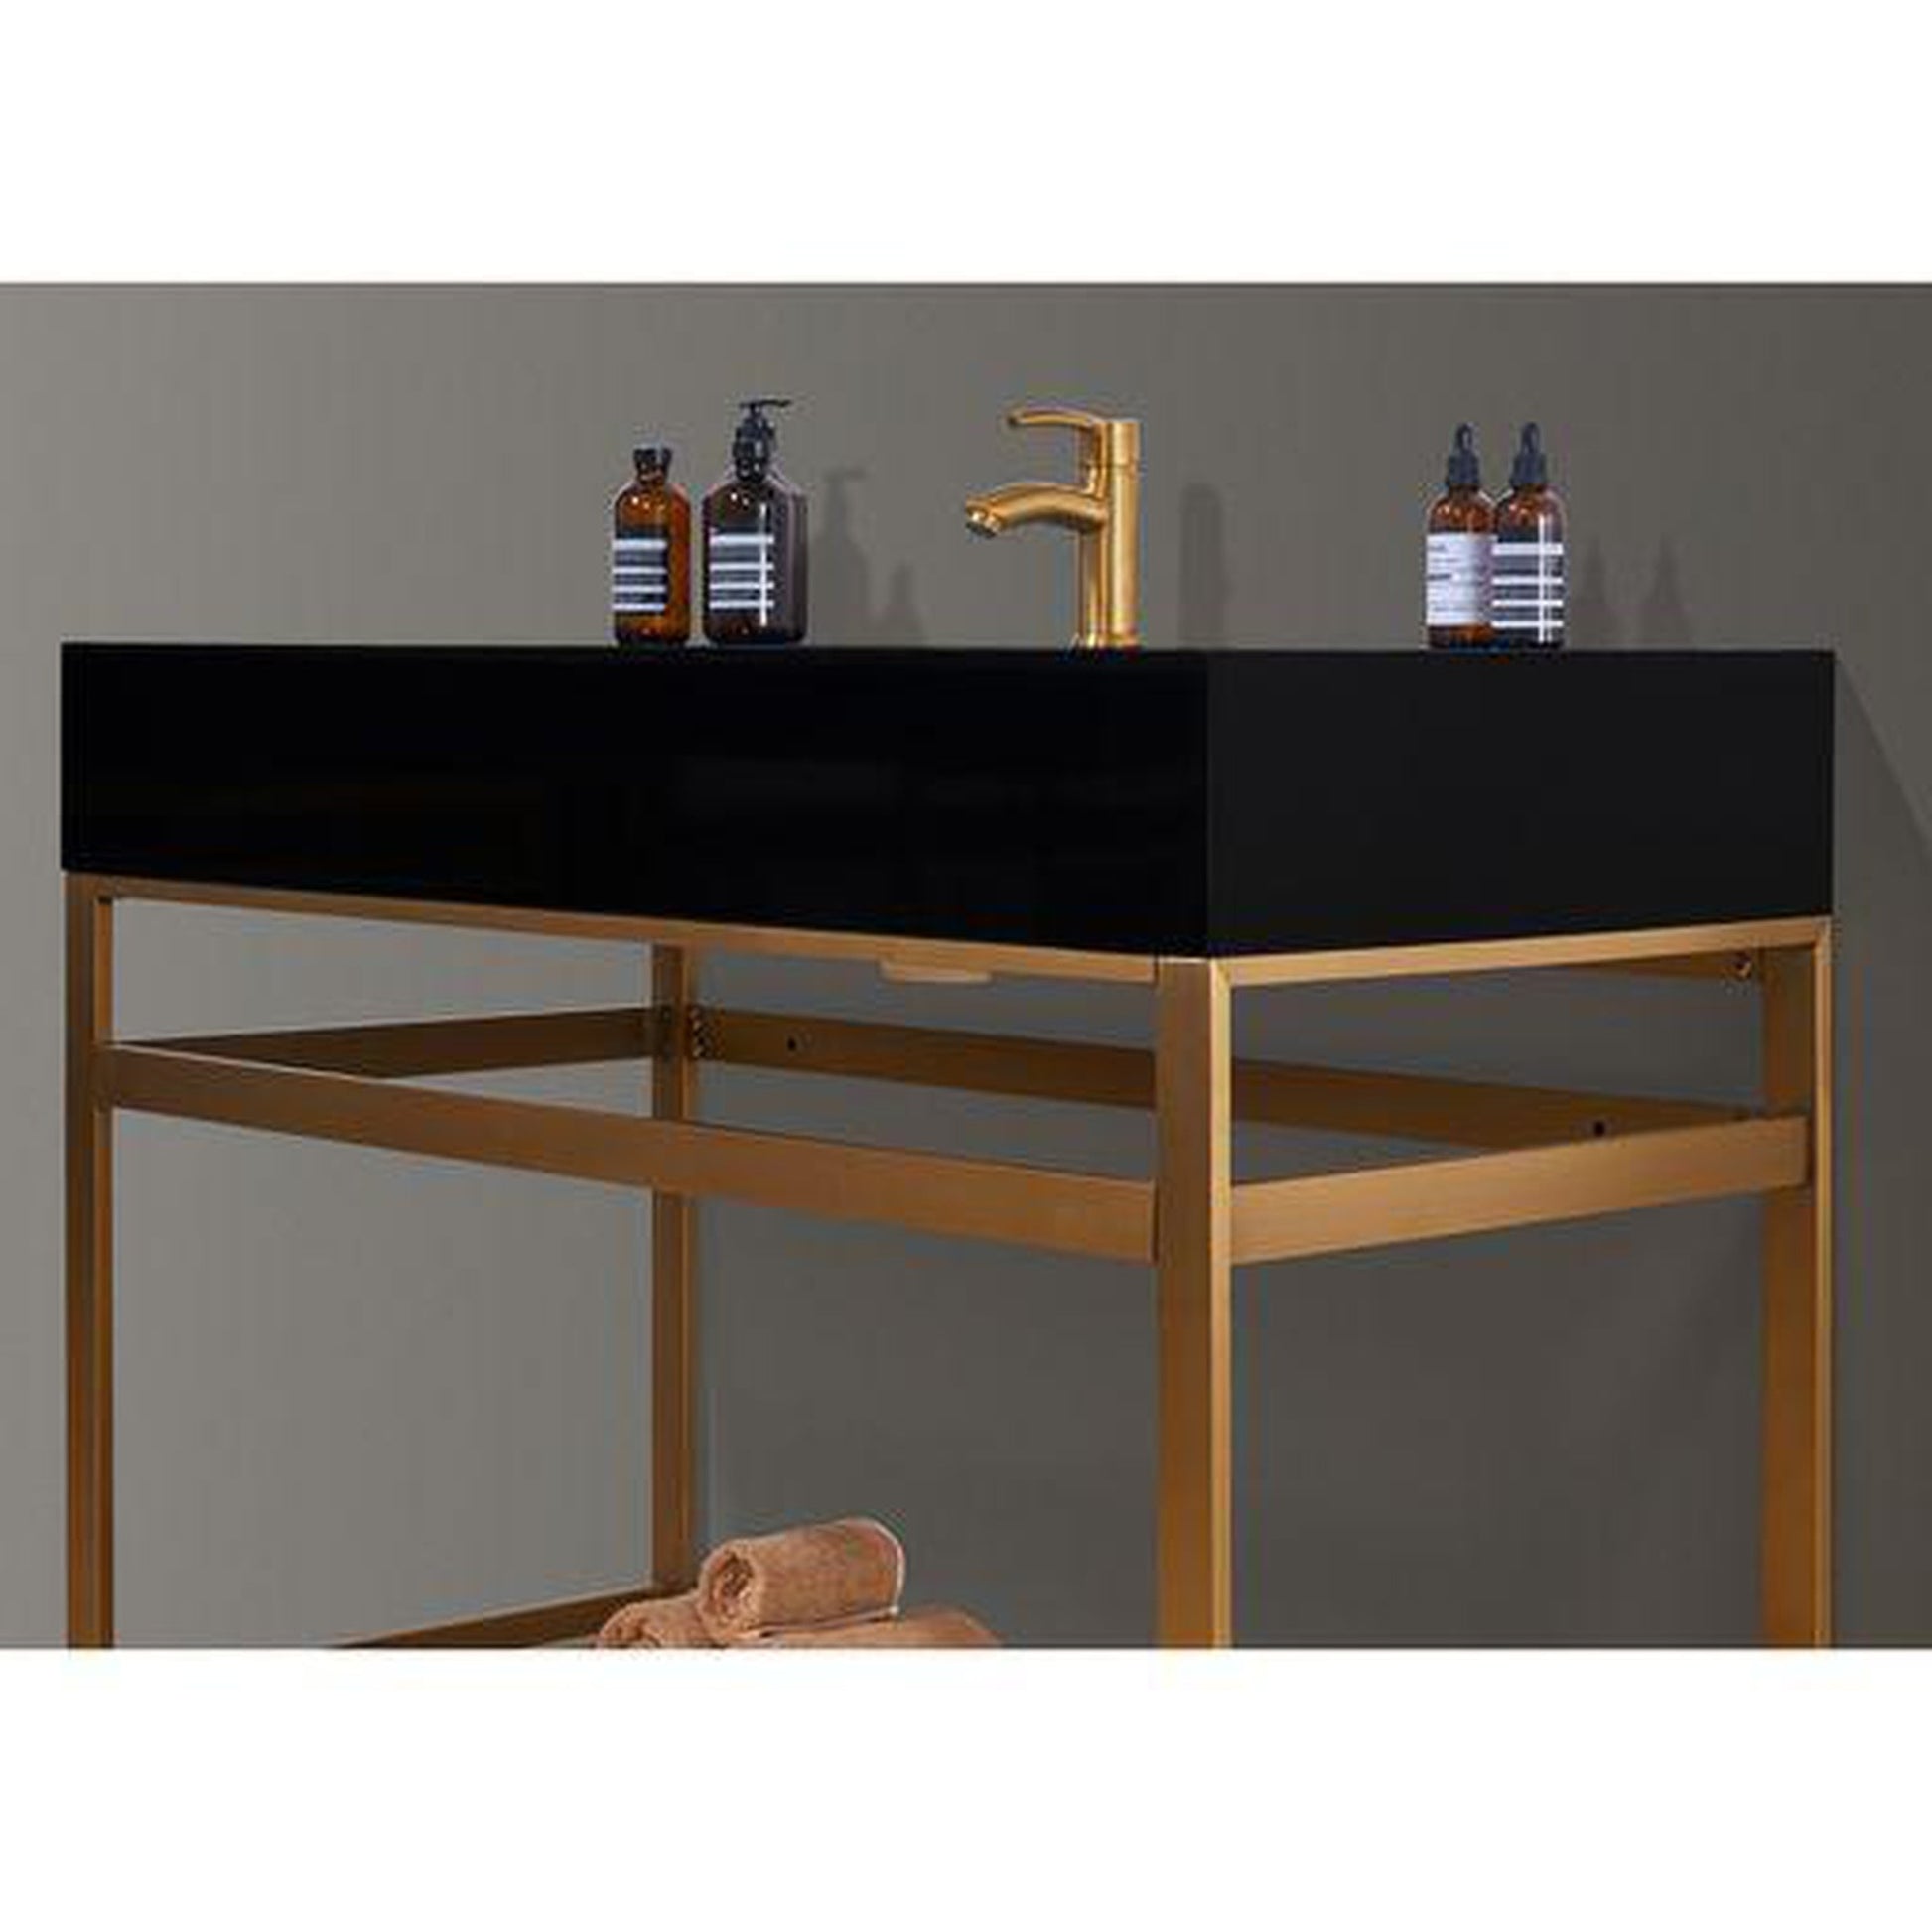 Altair Nauders 42" Brushed Gold Single Stainless Steel Bathroom Vanity Set Console With Imperial Black Stone Top, Single Rectangular Undermount Ceramic Sink, and Safety Overflow Hole